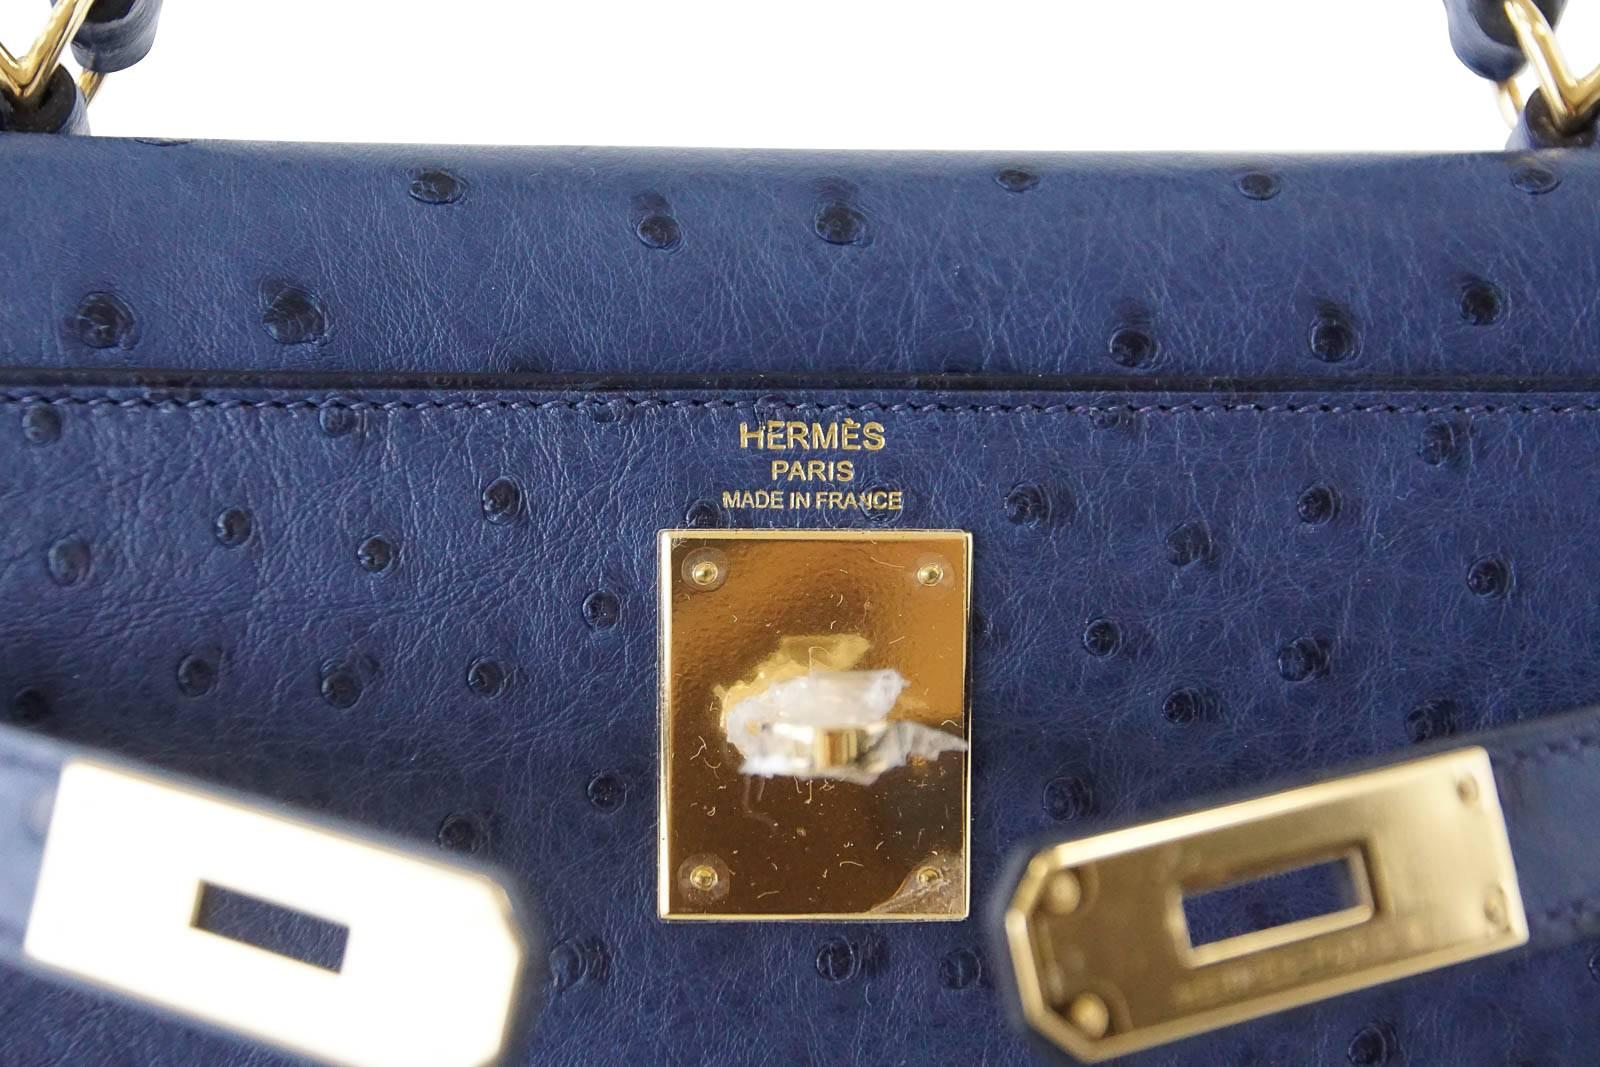 Guaranteed authentic exquisite Hermes 28 Sellier Ostrich Kelly bag in rich Blue Iris.
Chic and timeless.
Rare with Gold hardware.
Comes with lock, keys, strap, clochette, sleepers, raincoat and signature Hermes box.   
NEW or NEVER WORN.  
final